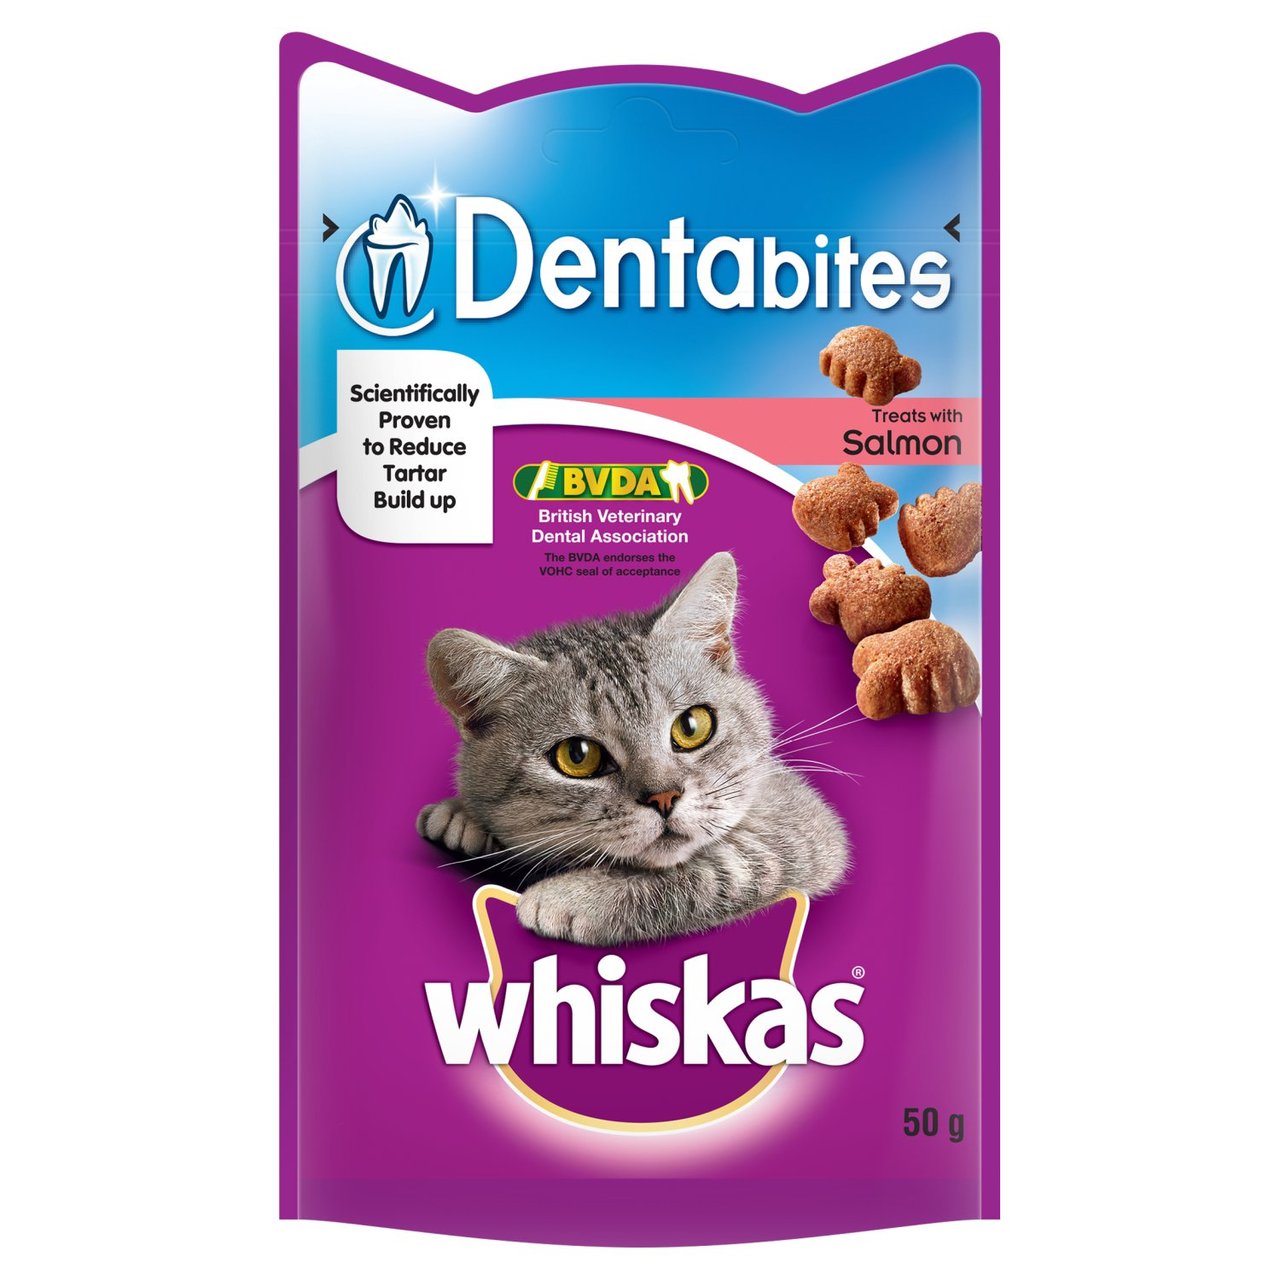 An image of Whiskas Dentabites Cat Treats with Salmon